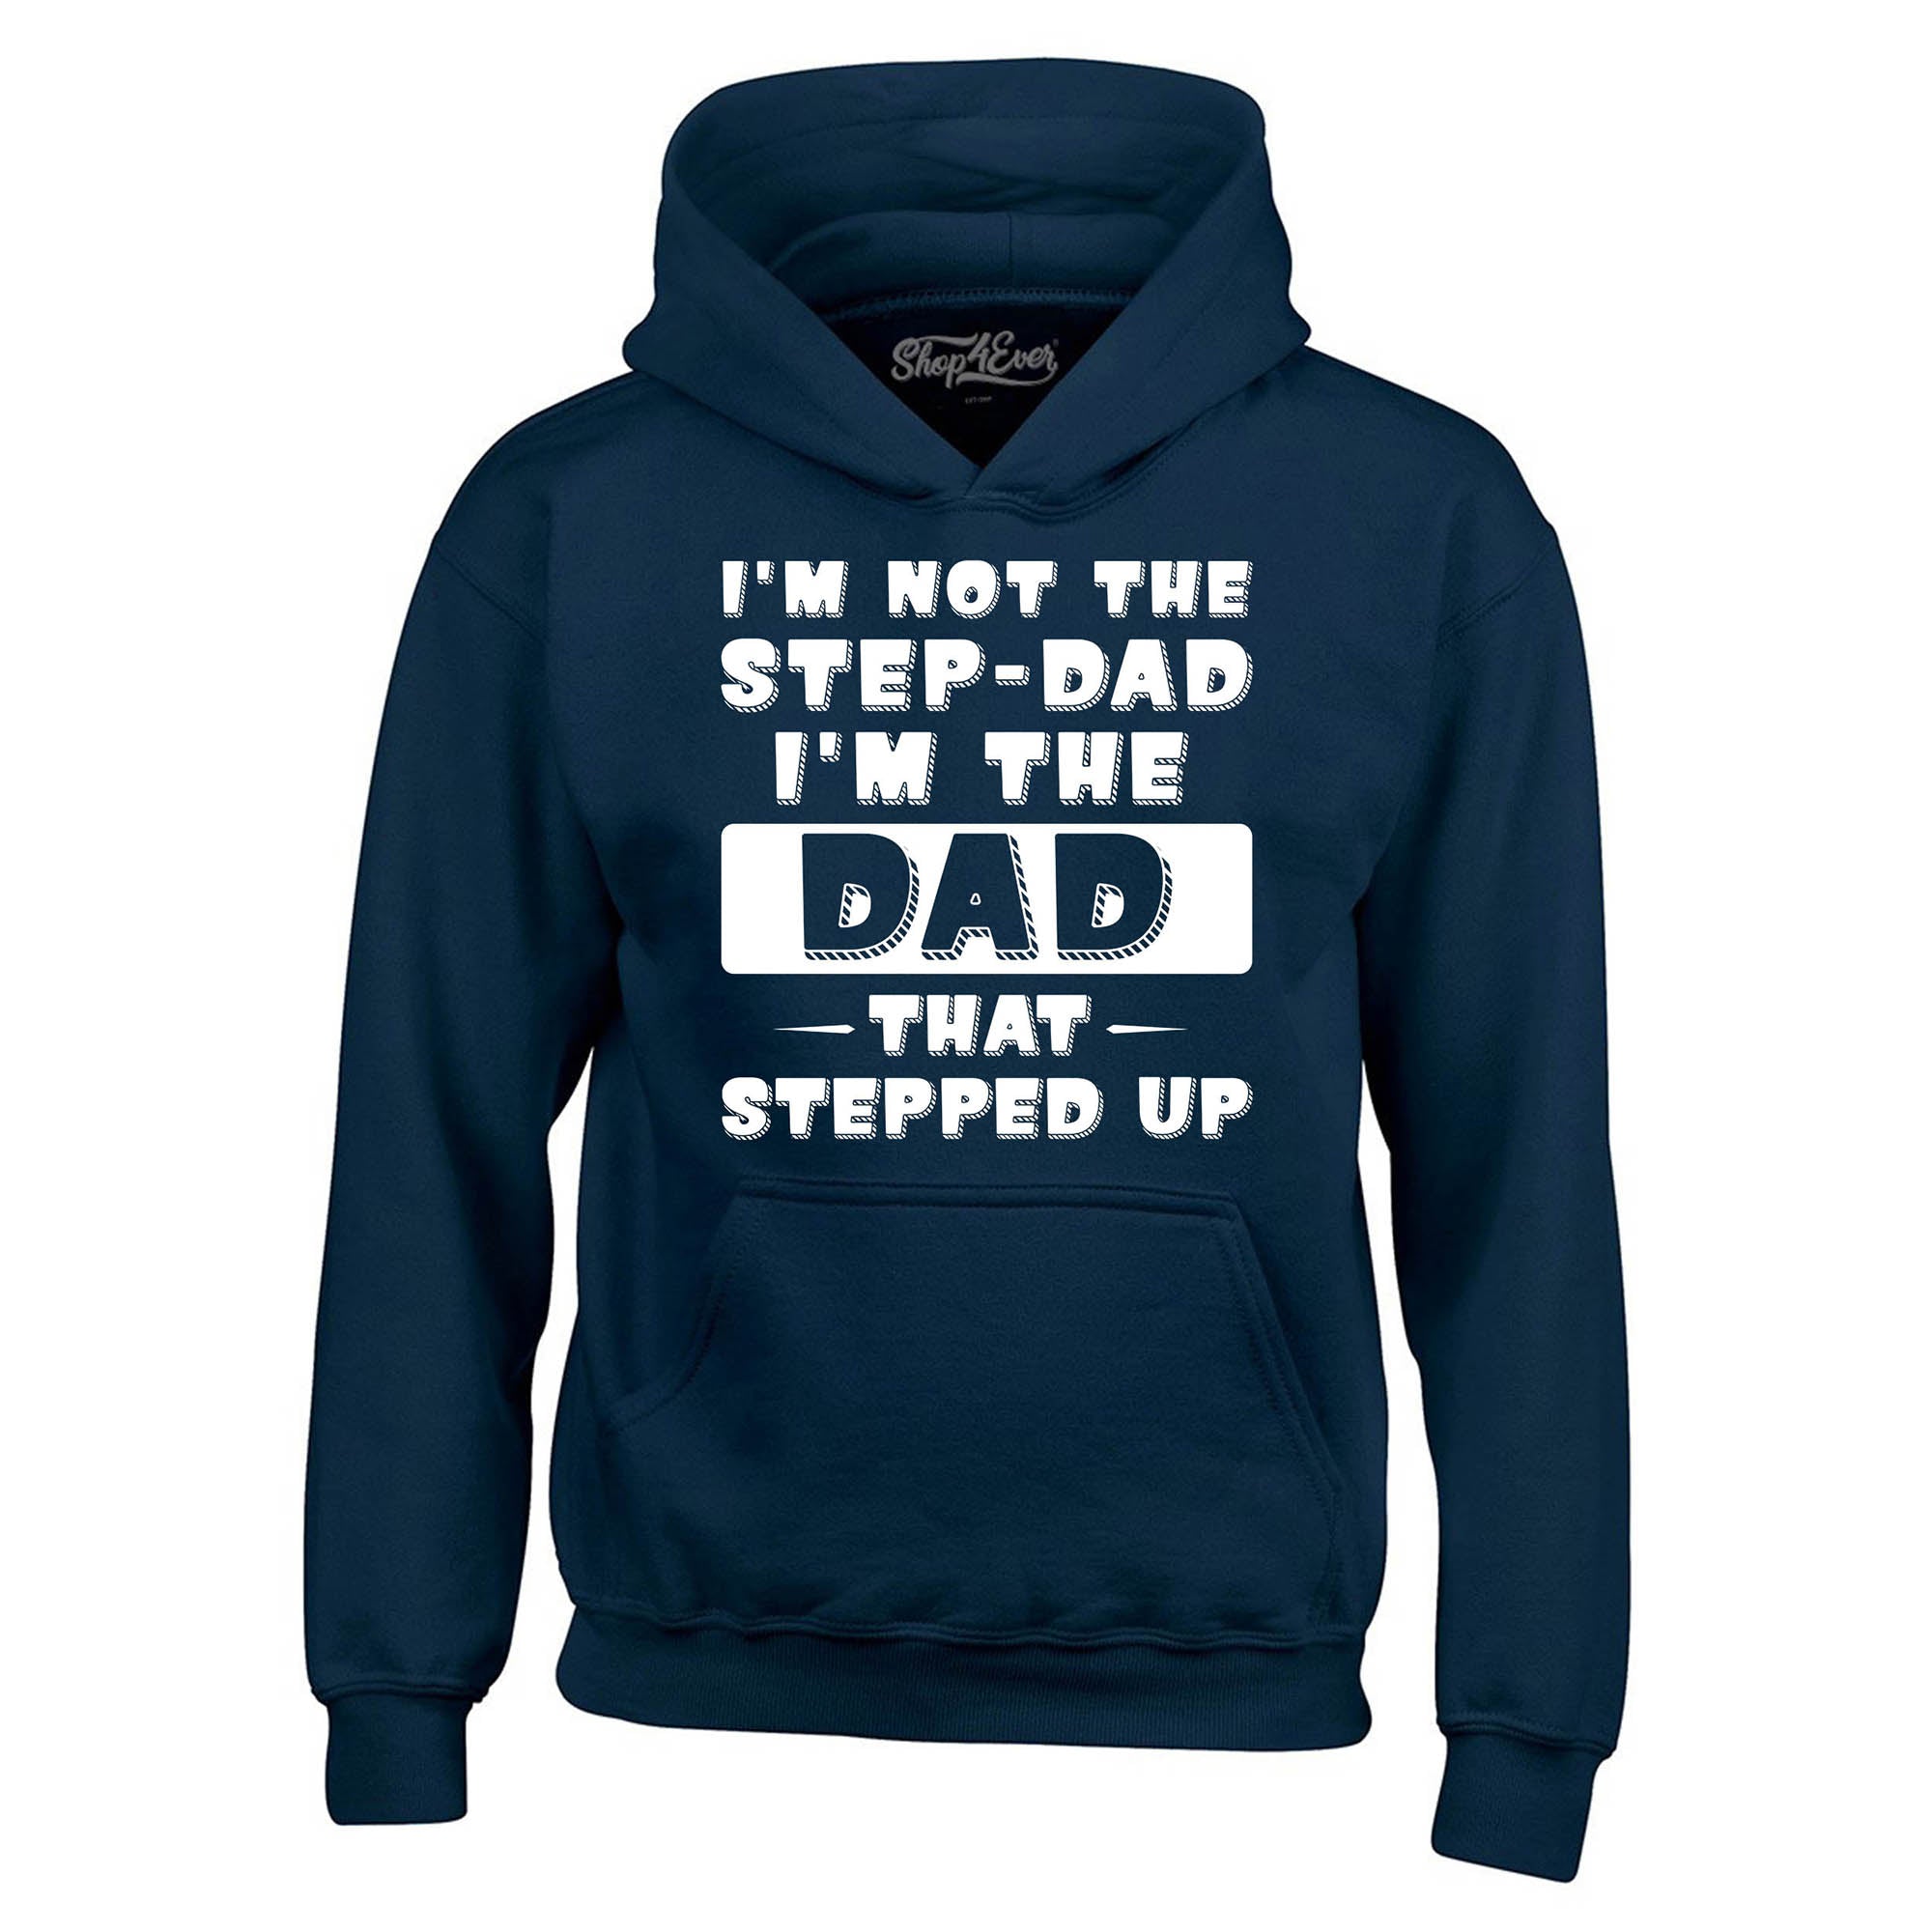 I'm Not the Step Dad I'm the Dad that Stepped Up Hoodie Sweatshirts